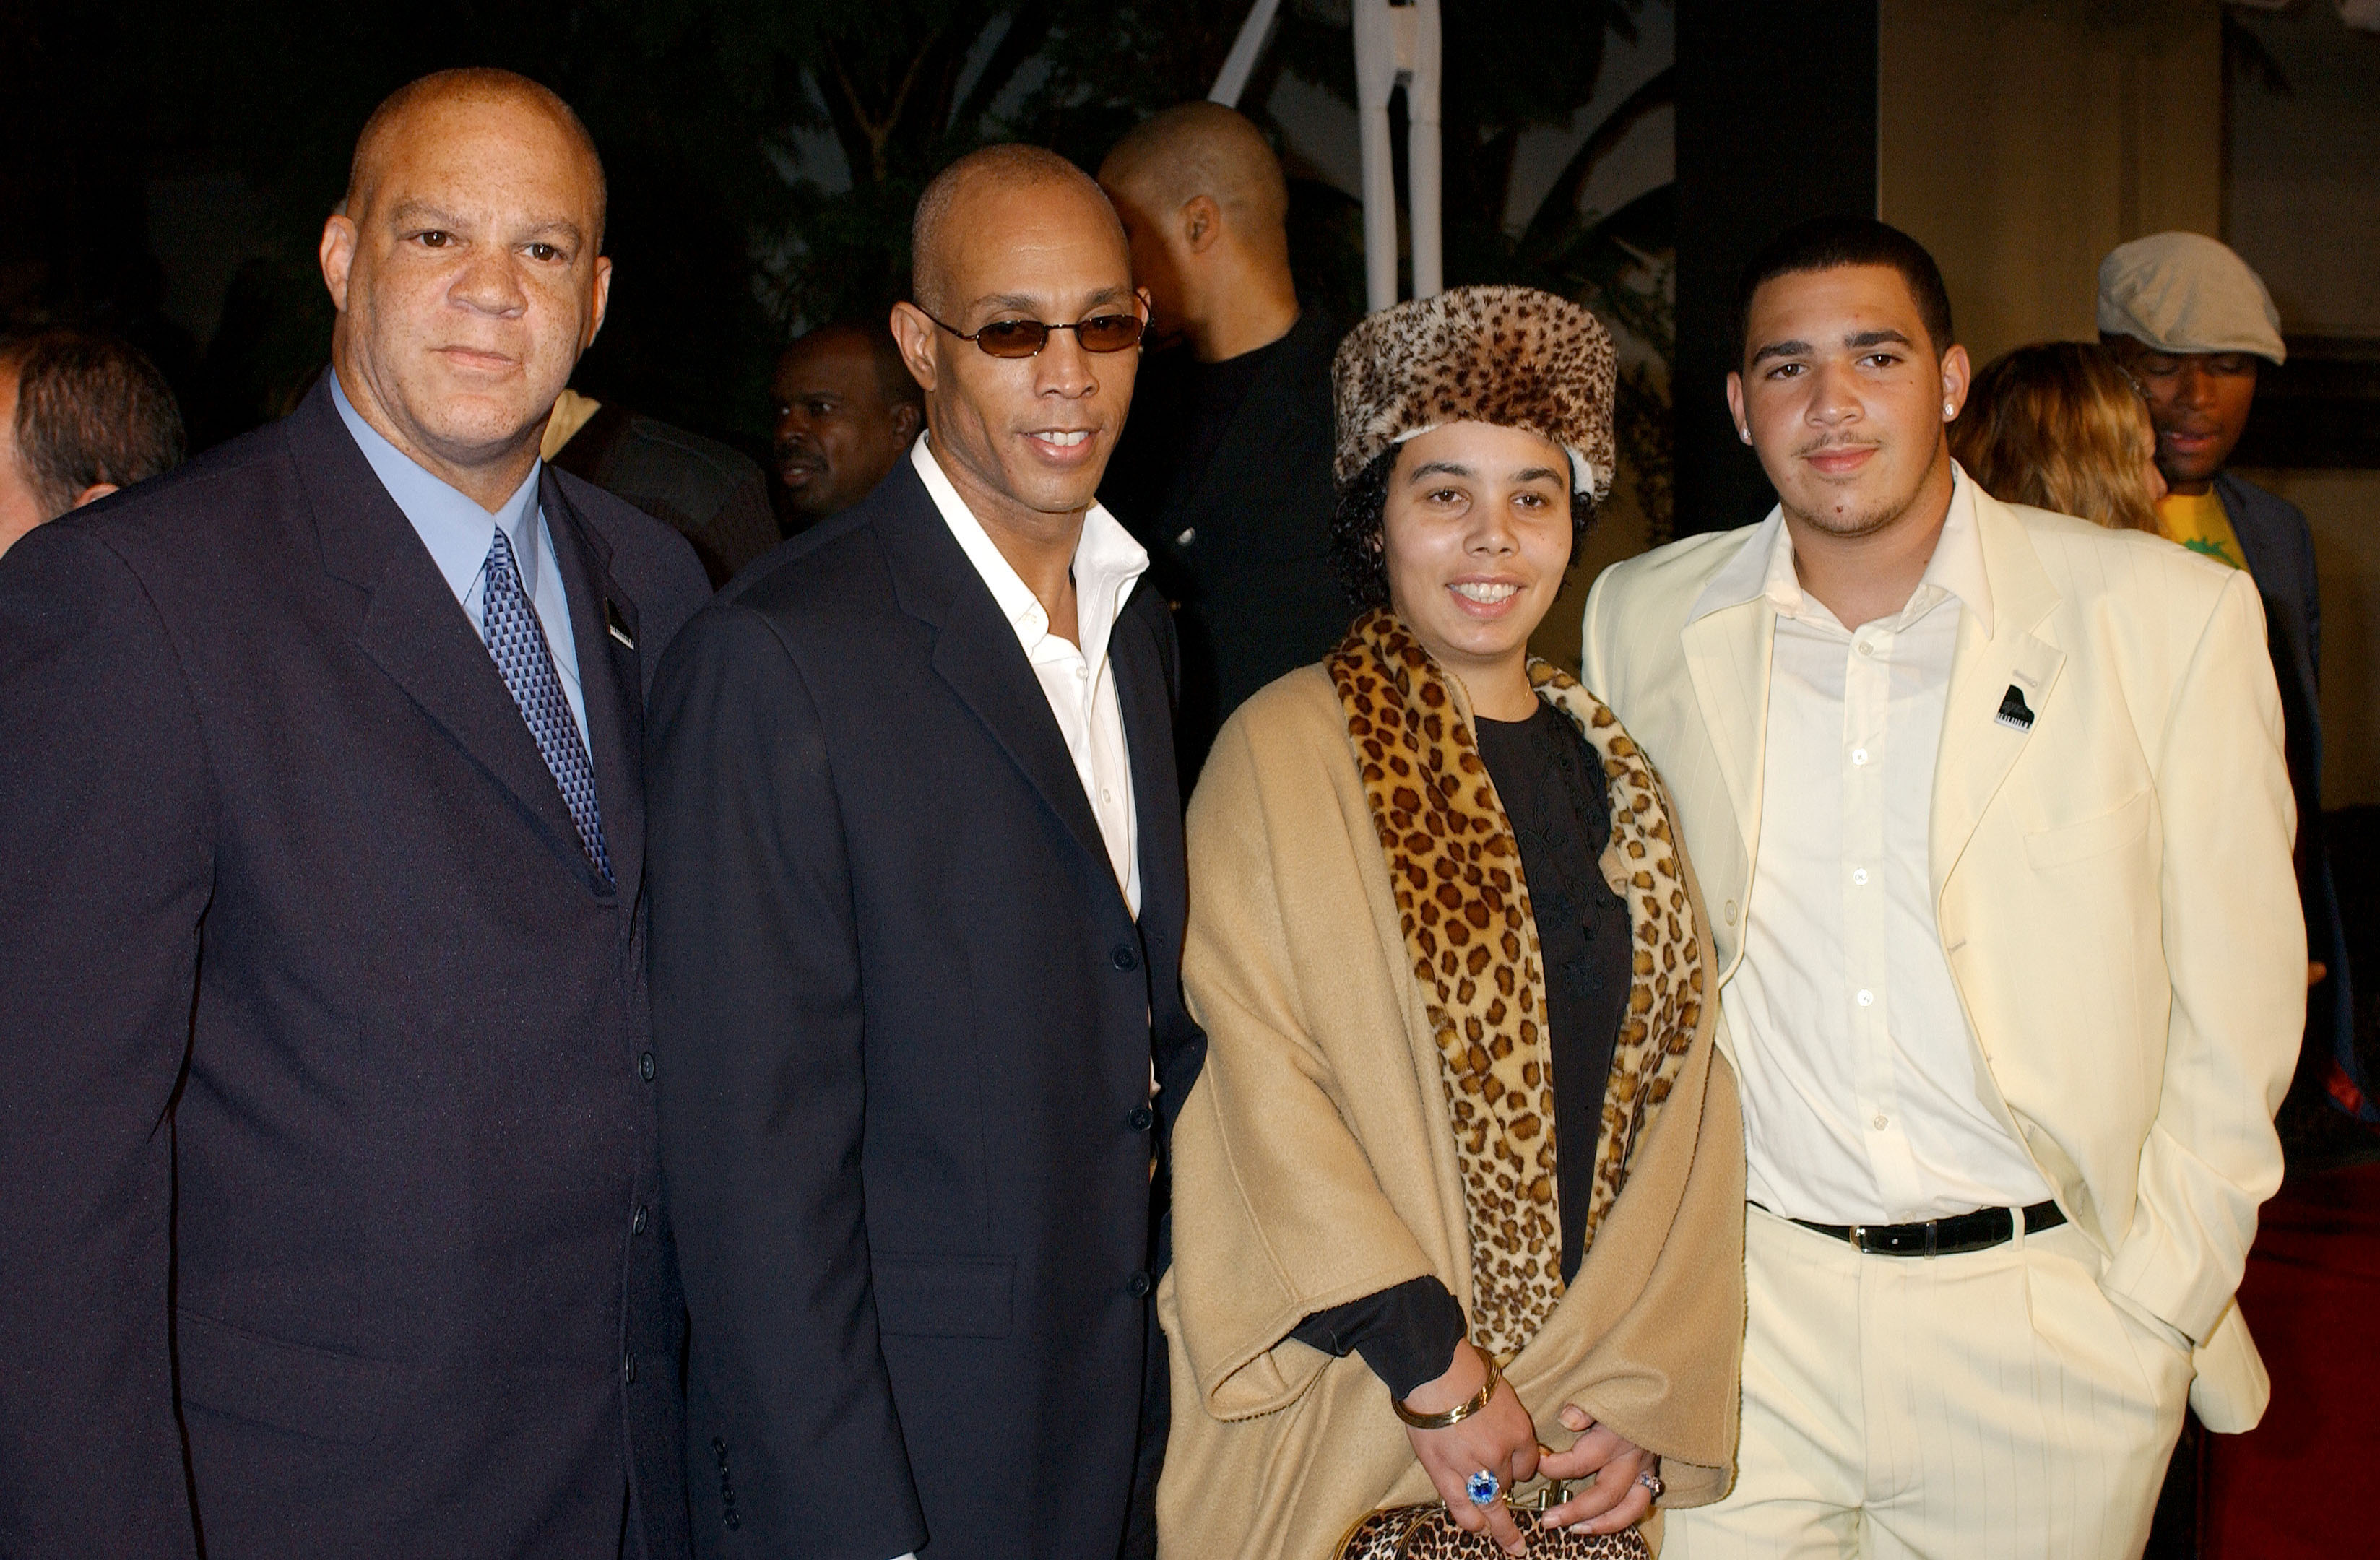 Rev. Robert Robinson Sr., Ray Charles Robinson Jr., Alexandria Robinson, and Corey Robinson at the "Ray" Los Angeles Premiere on October 19, 2004 | Source: Getty Images